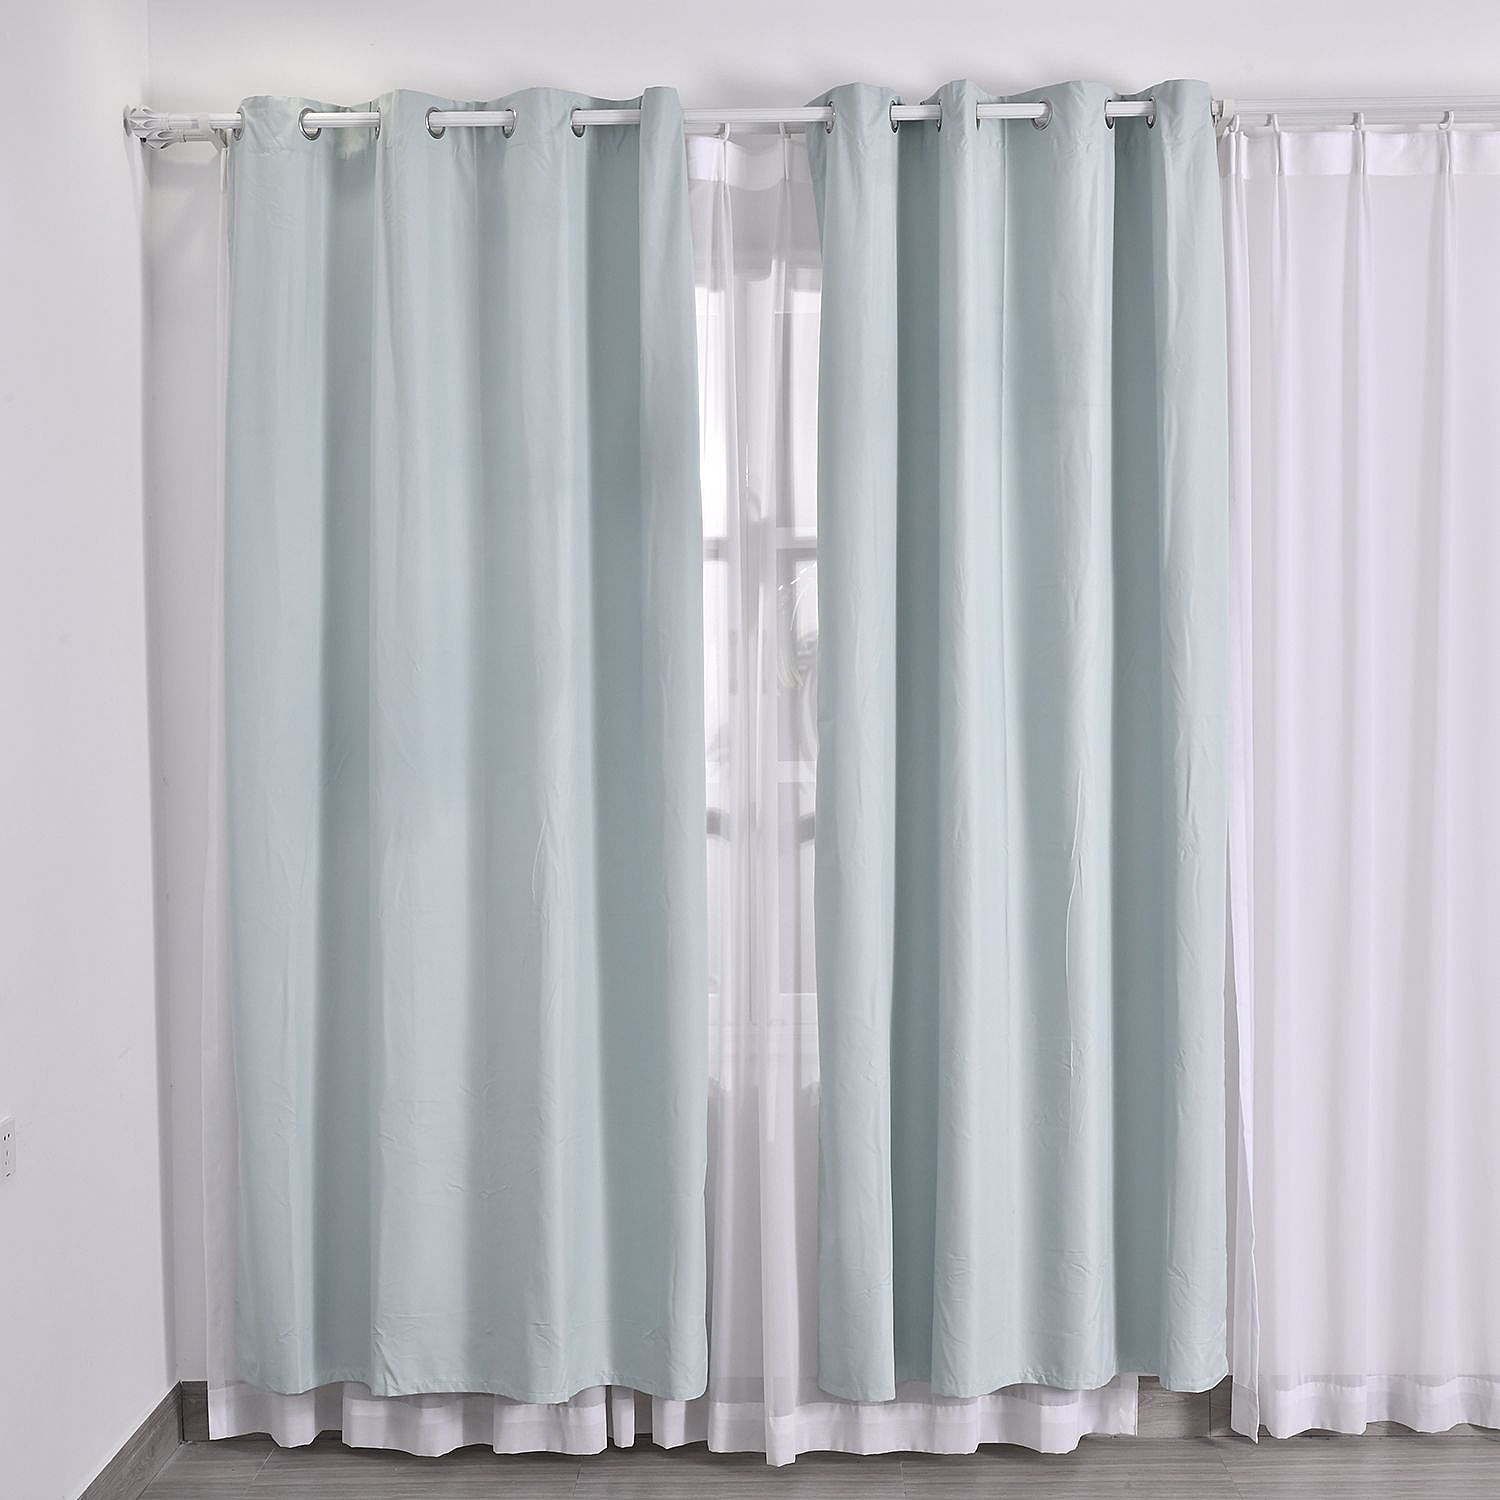 Homesmart-Polyester-Solid-Curtain-and-Blind-Size-132x1-cm-Mint-Blue